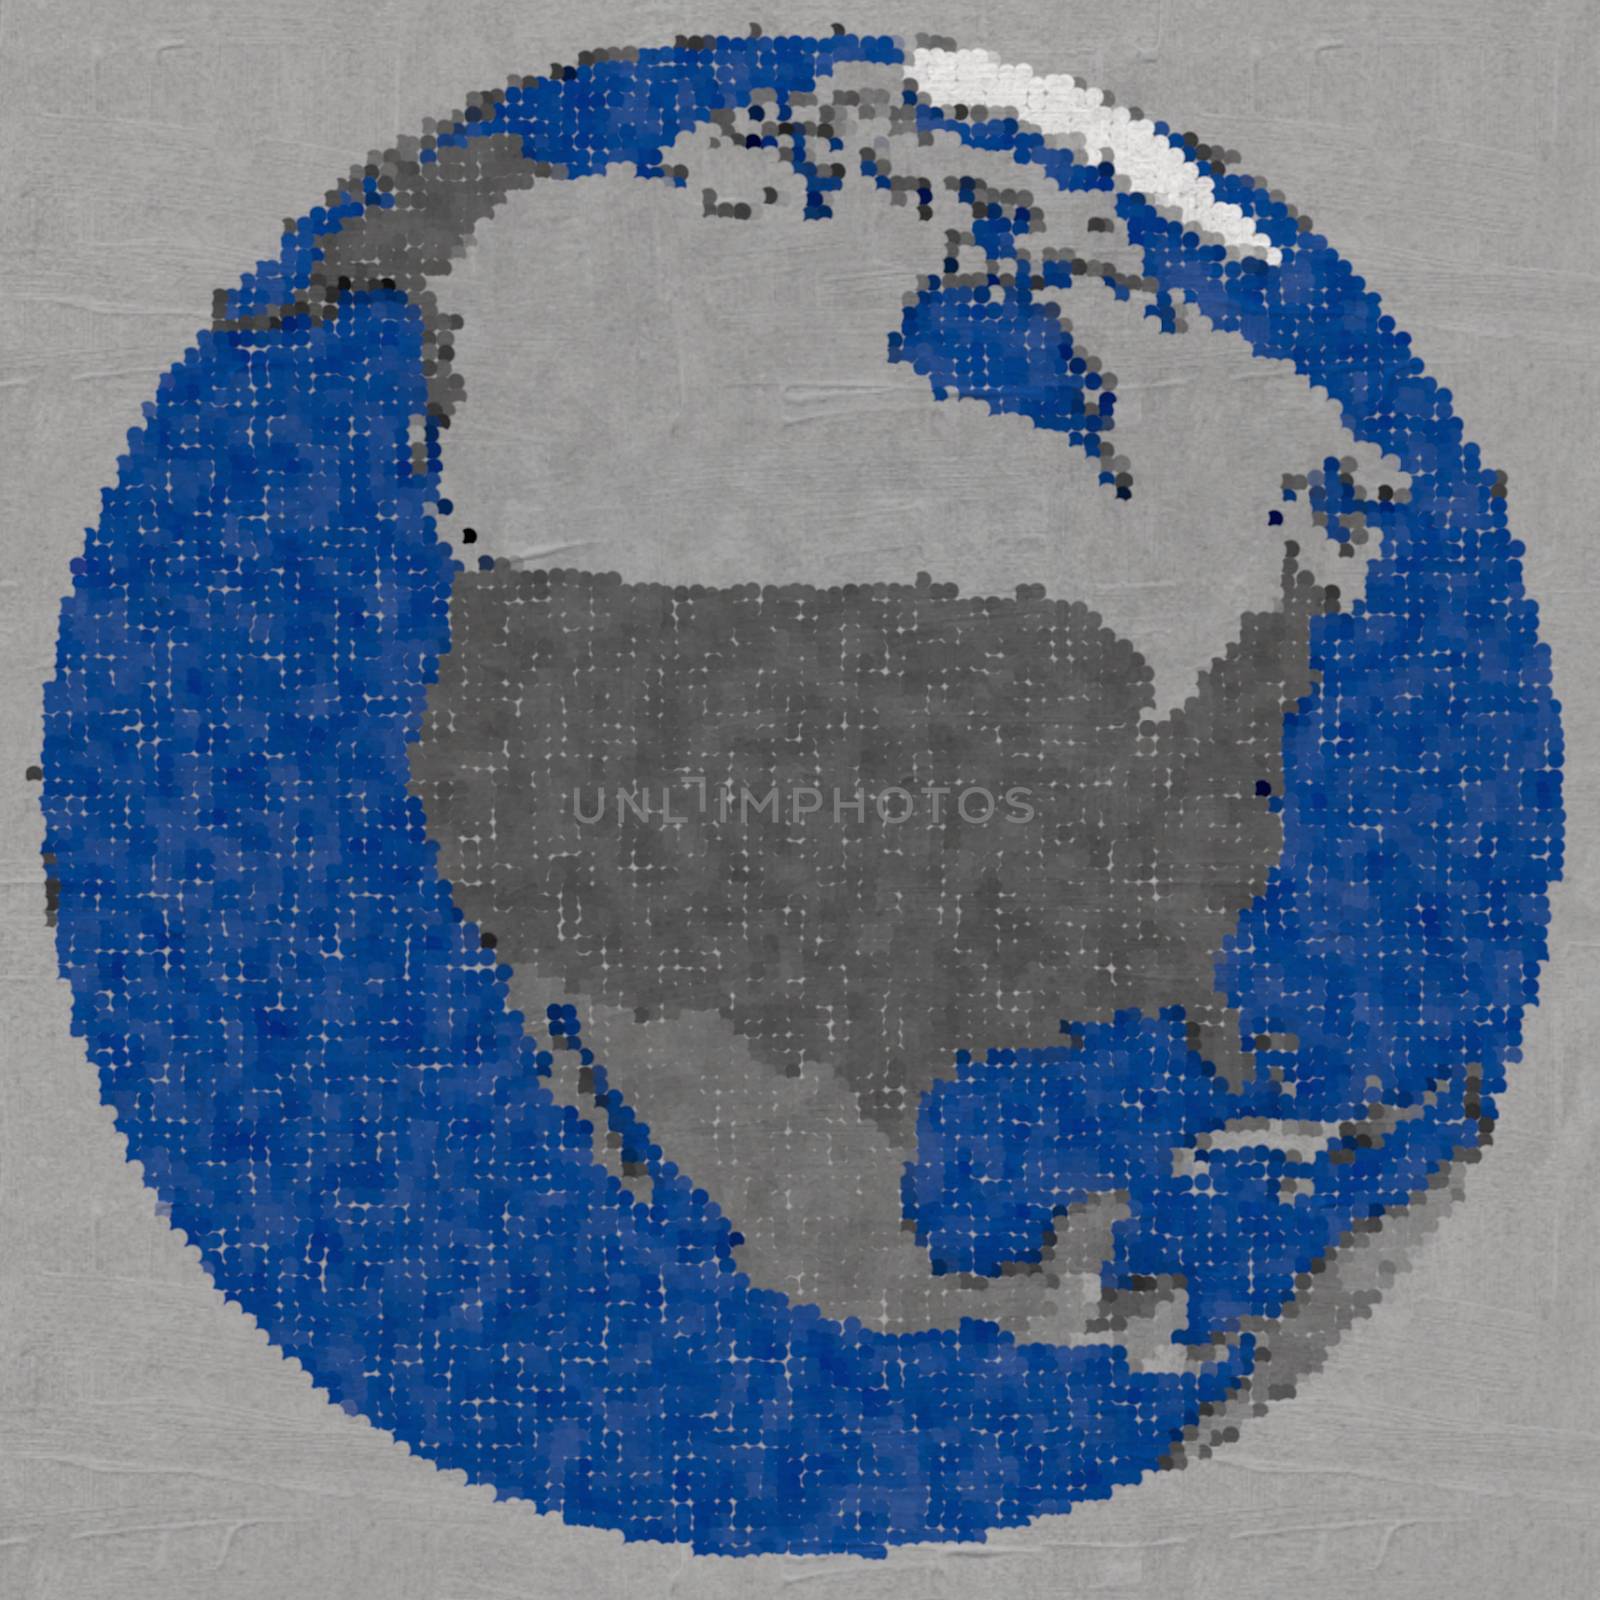 Drawing of north America on Earth by Harvepino